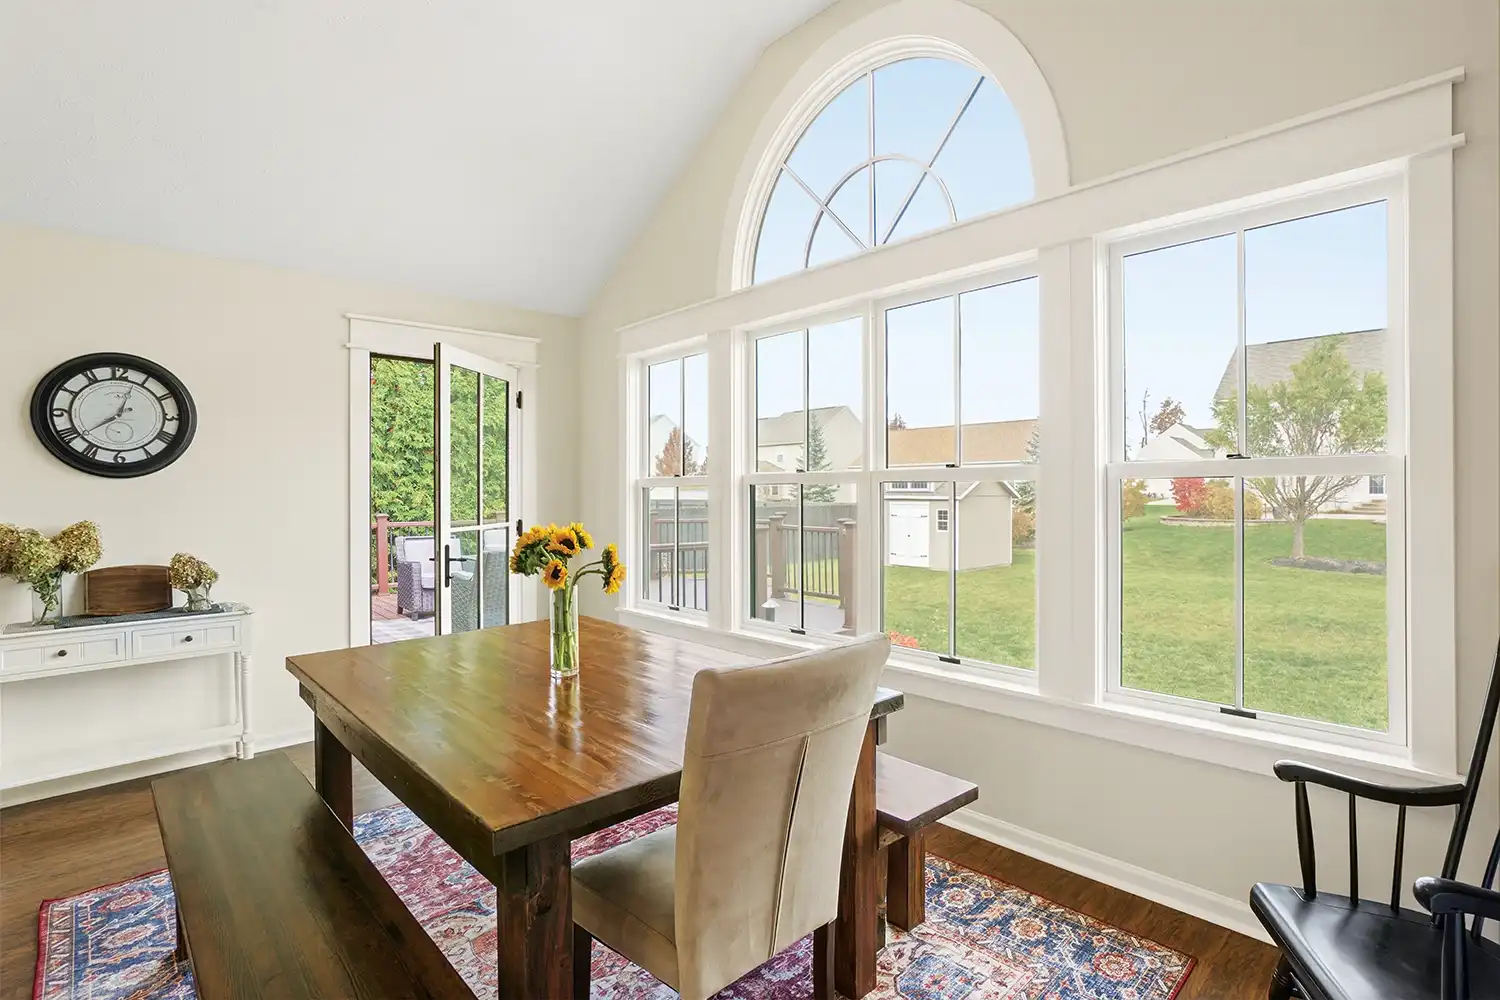 Interior view of an arch window in a dining room.